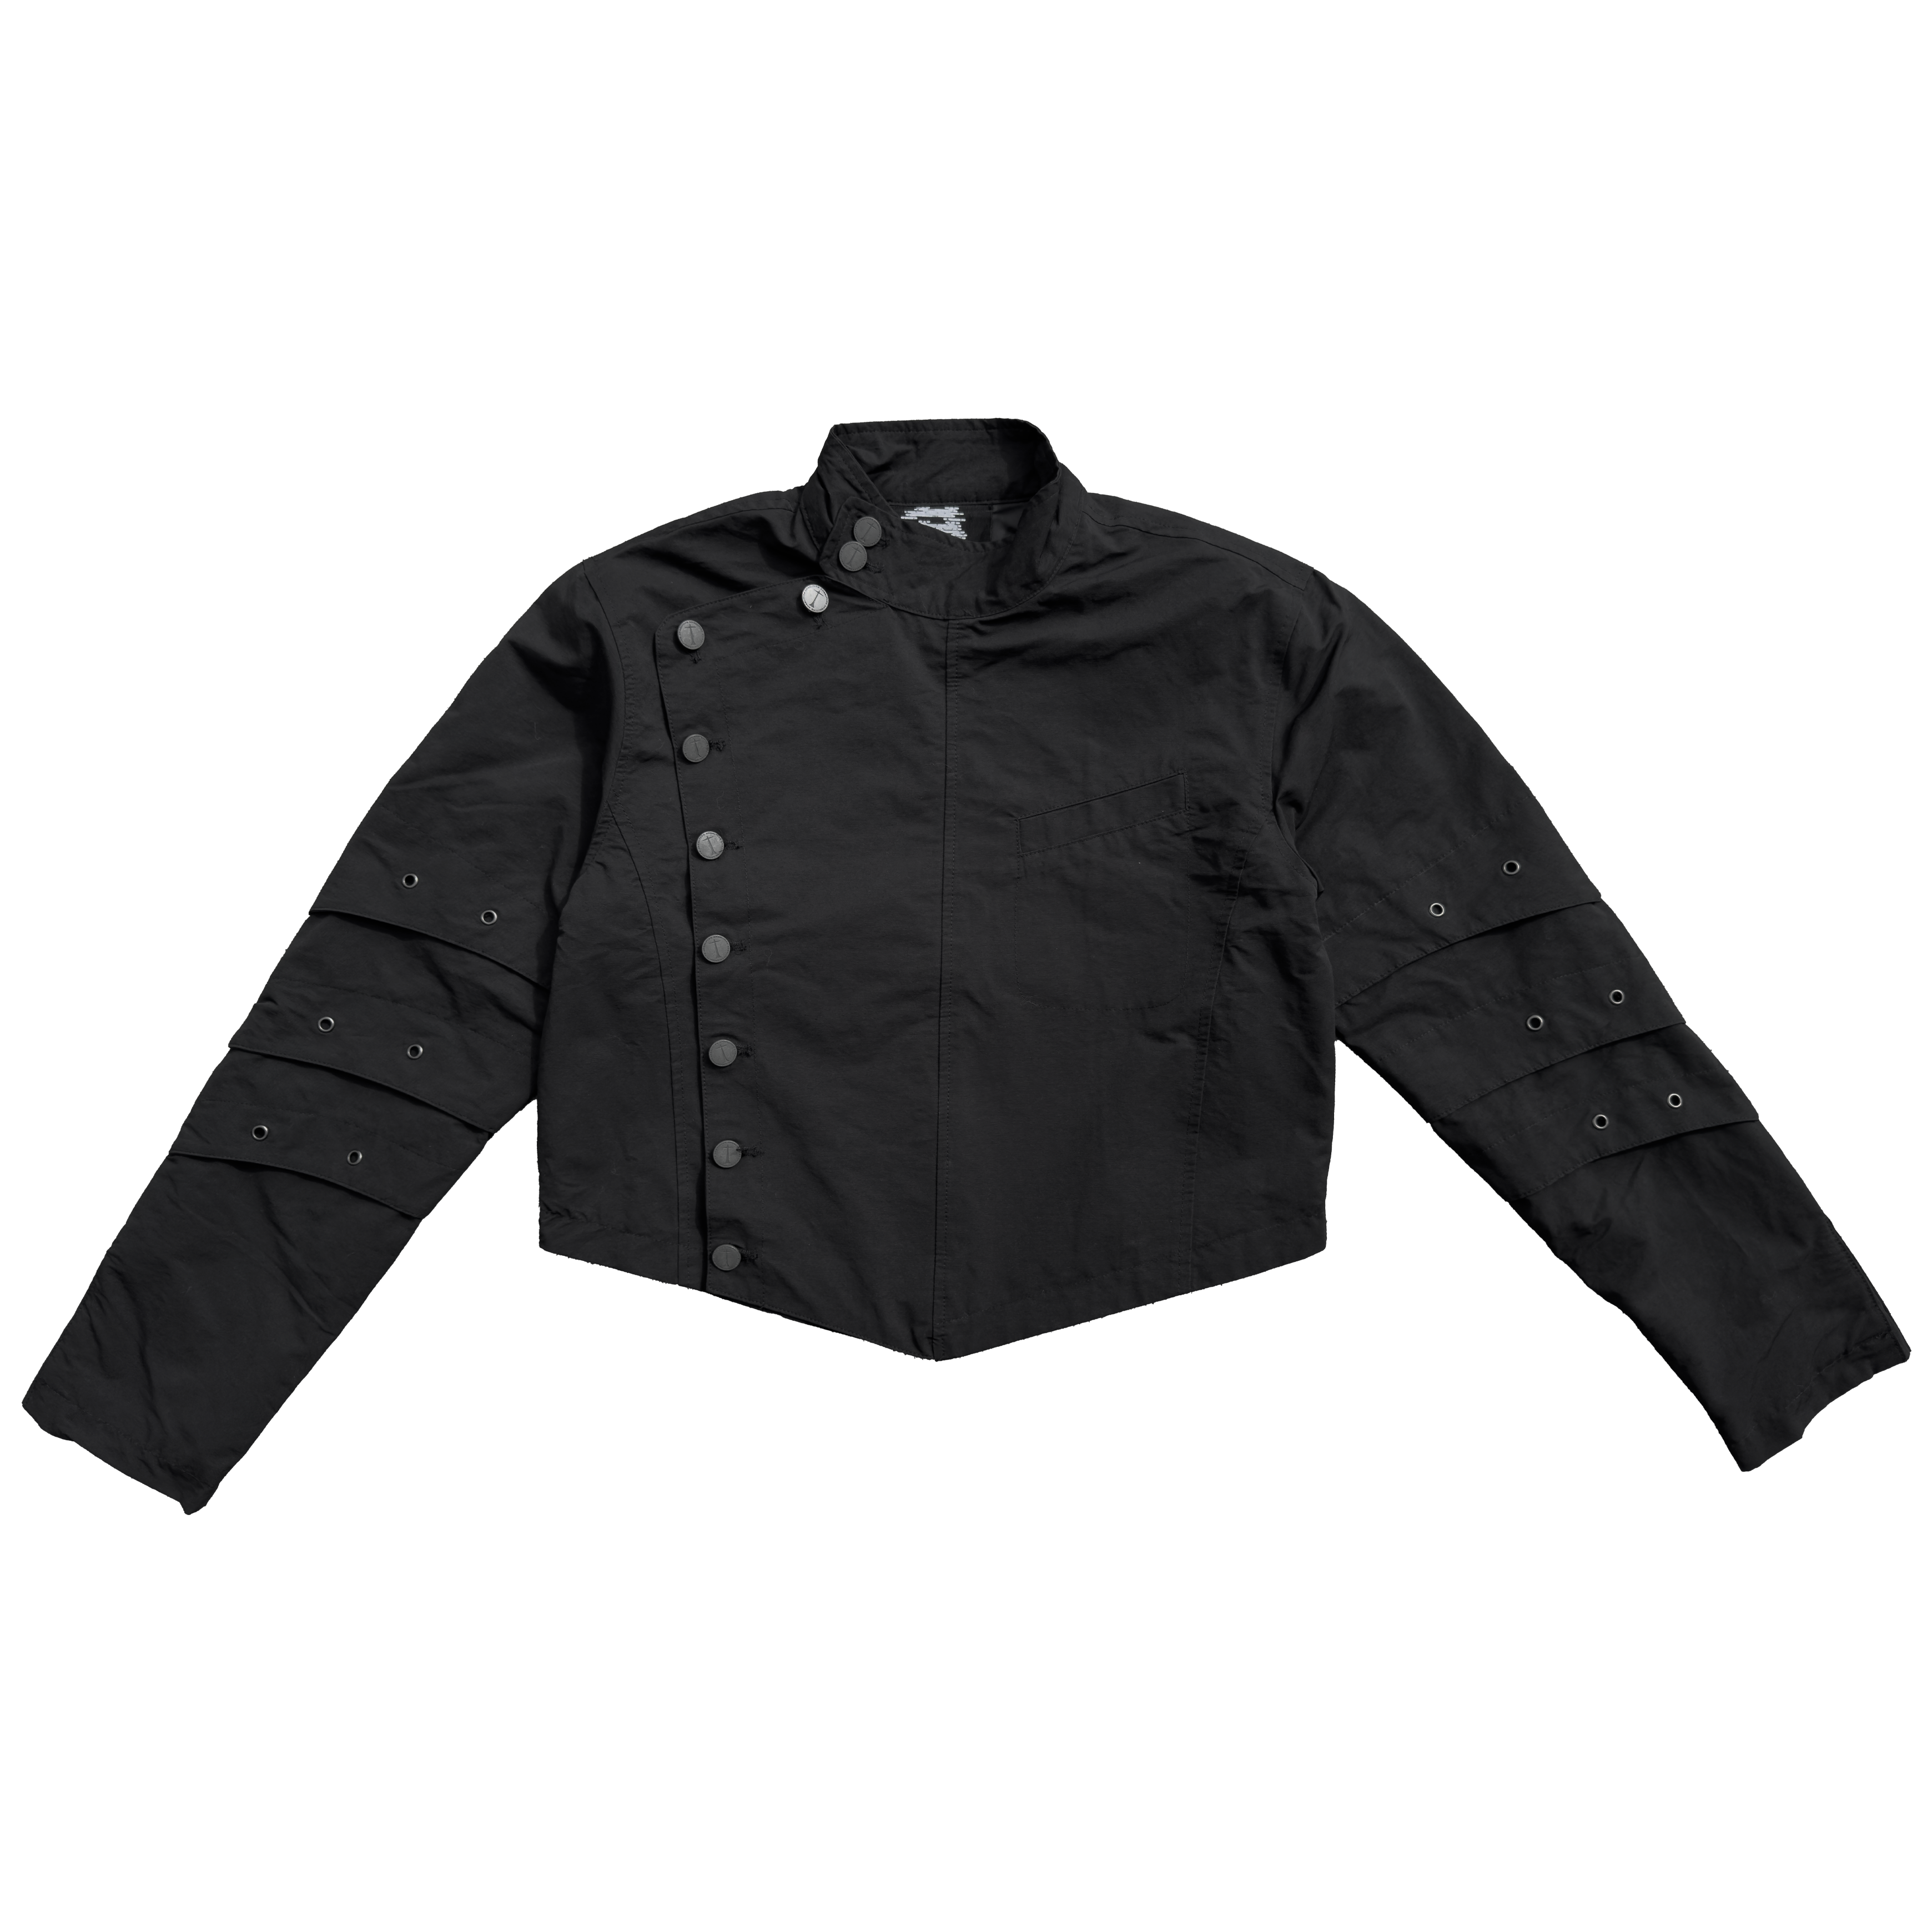 (A) ARMOUR FENCING JACKET